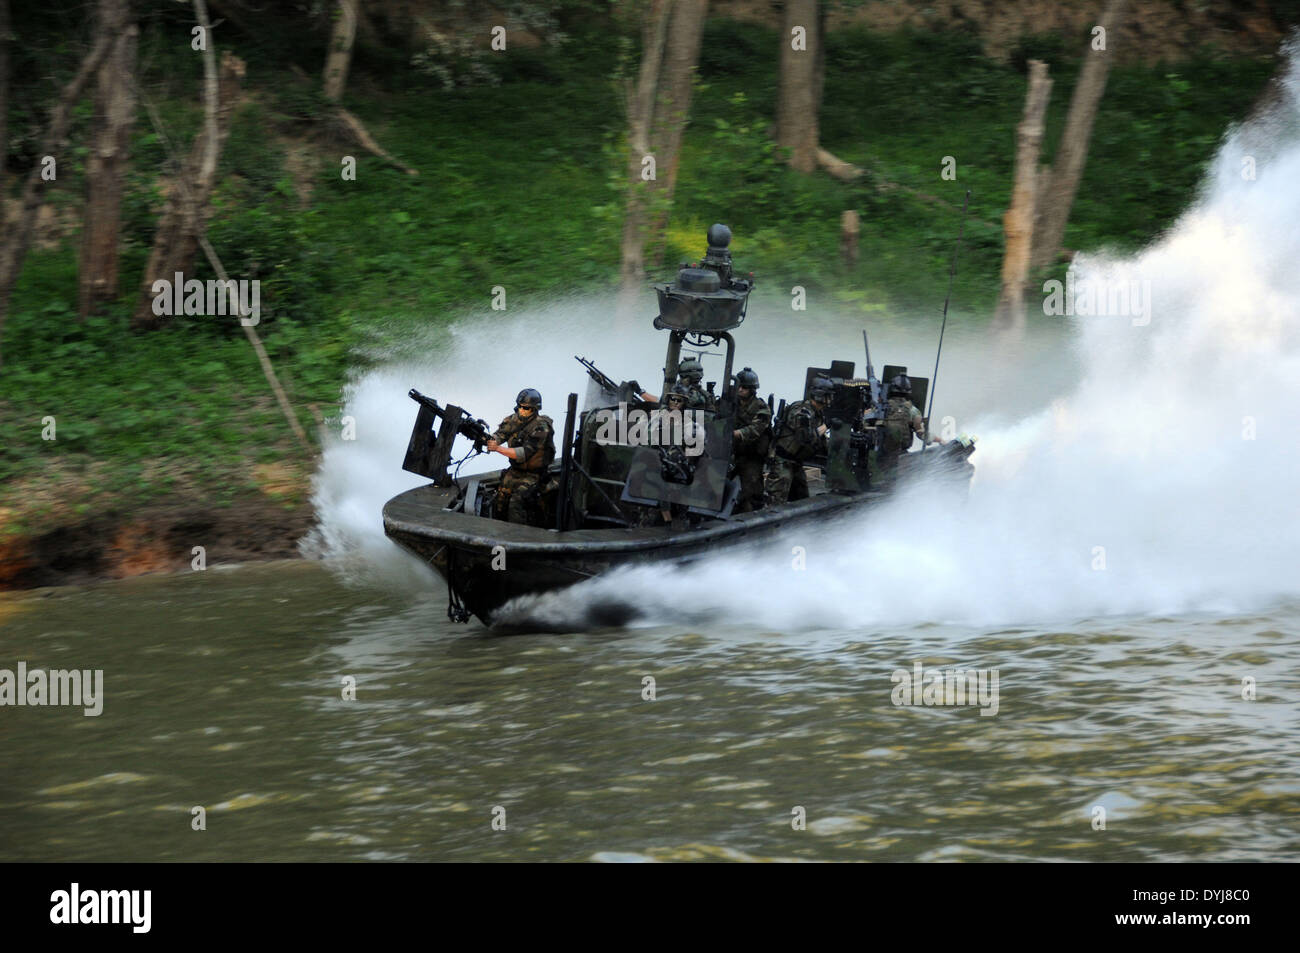 US Navy SEAL Special Warfare Combatant craft Crewmen assigned to Special Boat Team 22 conduct live-fire drills at the riverine training range August 11, 2008 in Fort Knox, Kentucky. Stock Photo